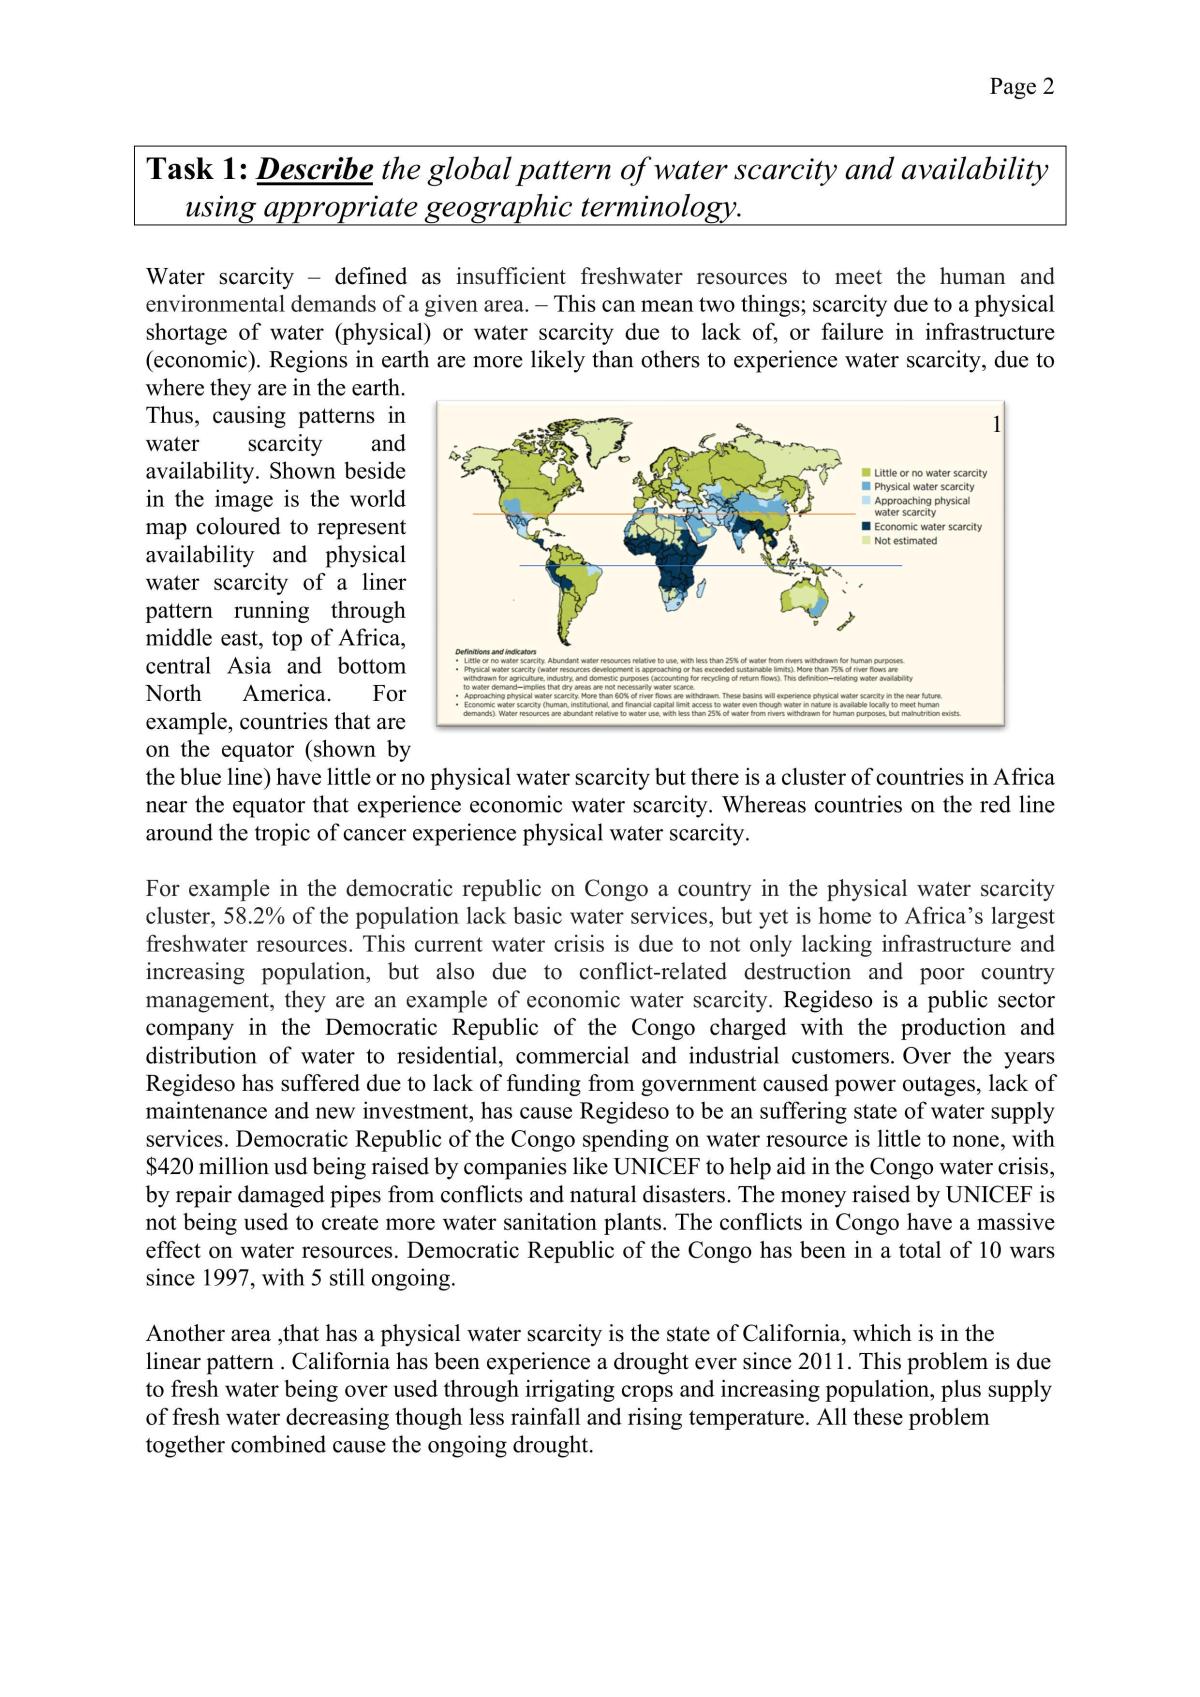 Analyse Aspects of a Geographic Topic at a Global Scale - Page 2